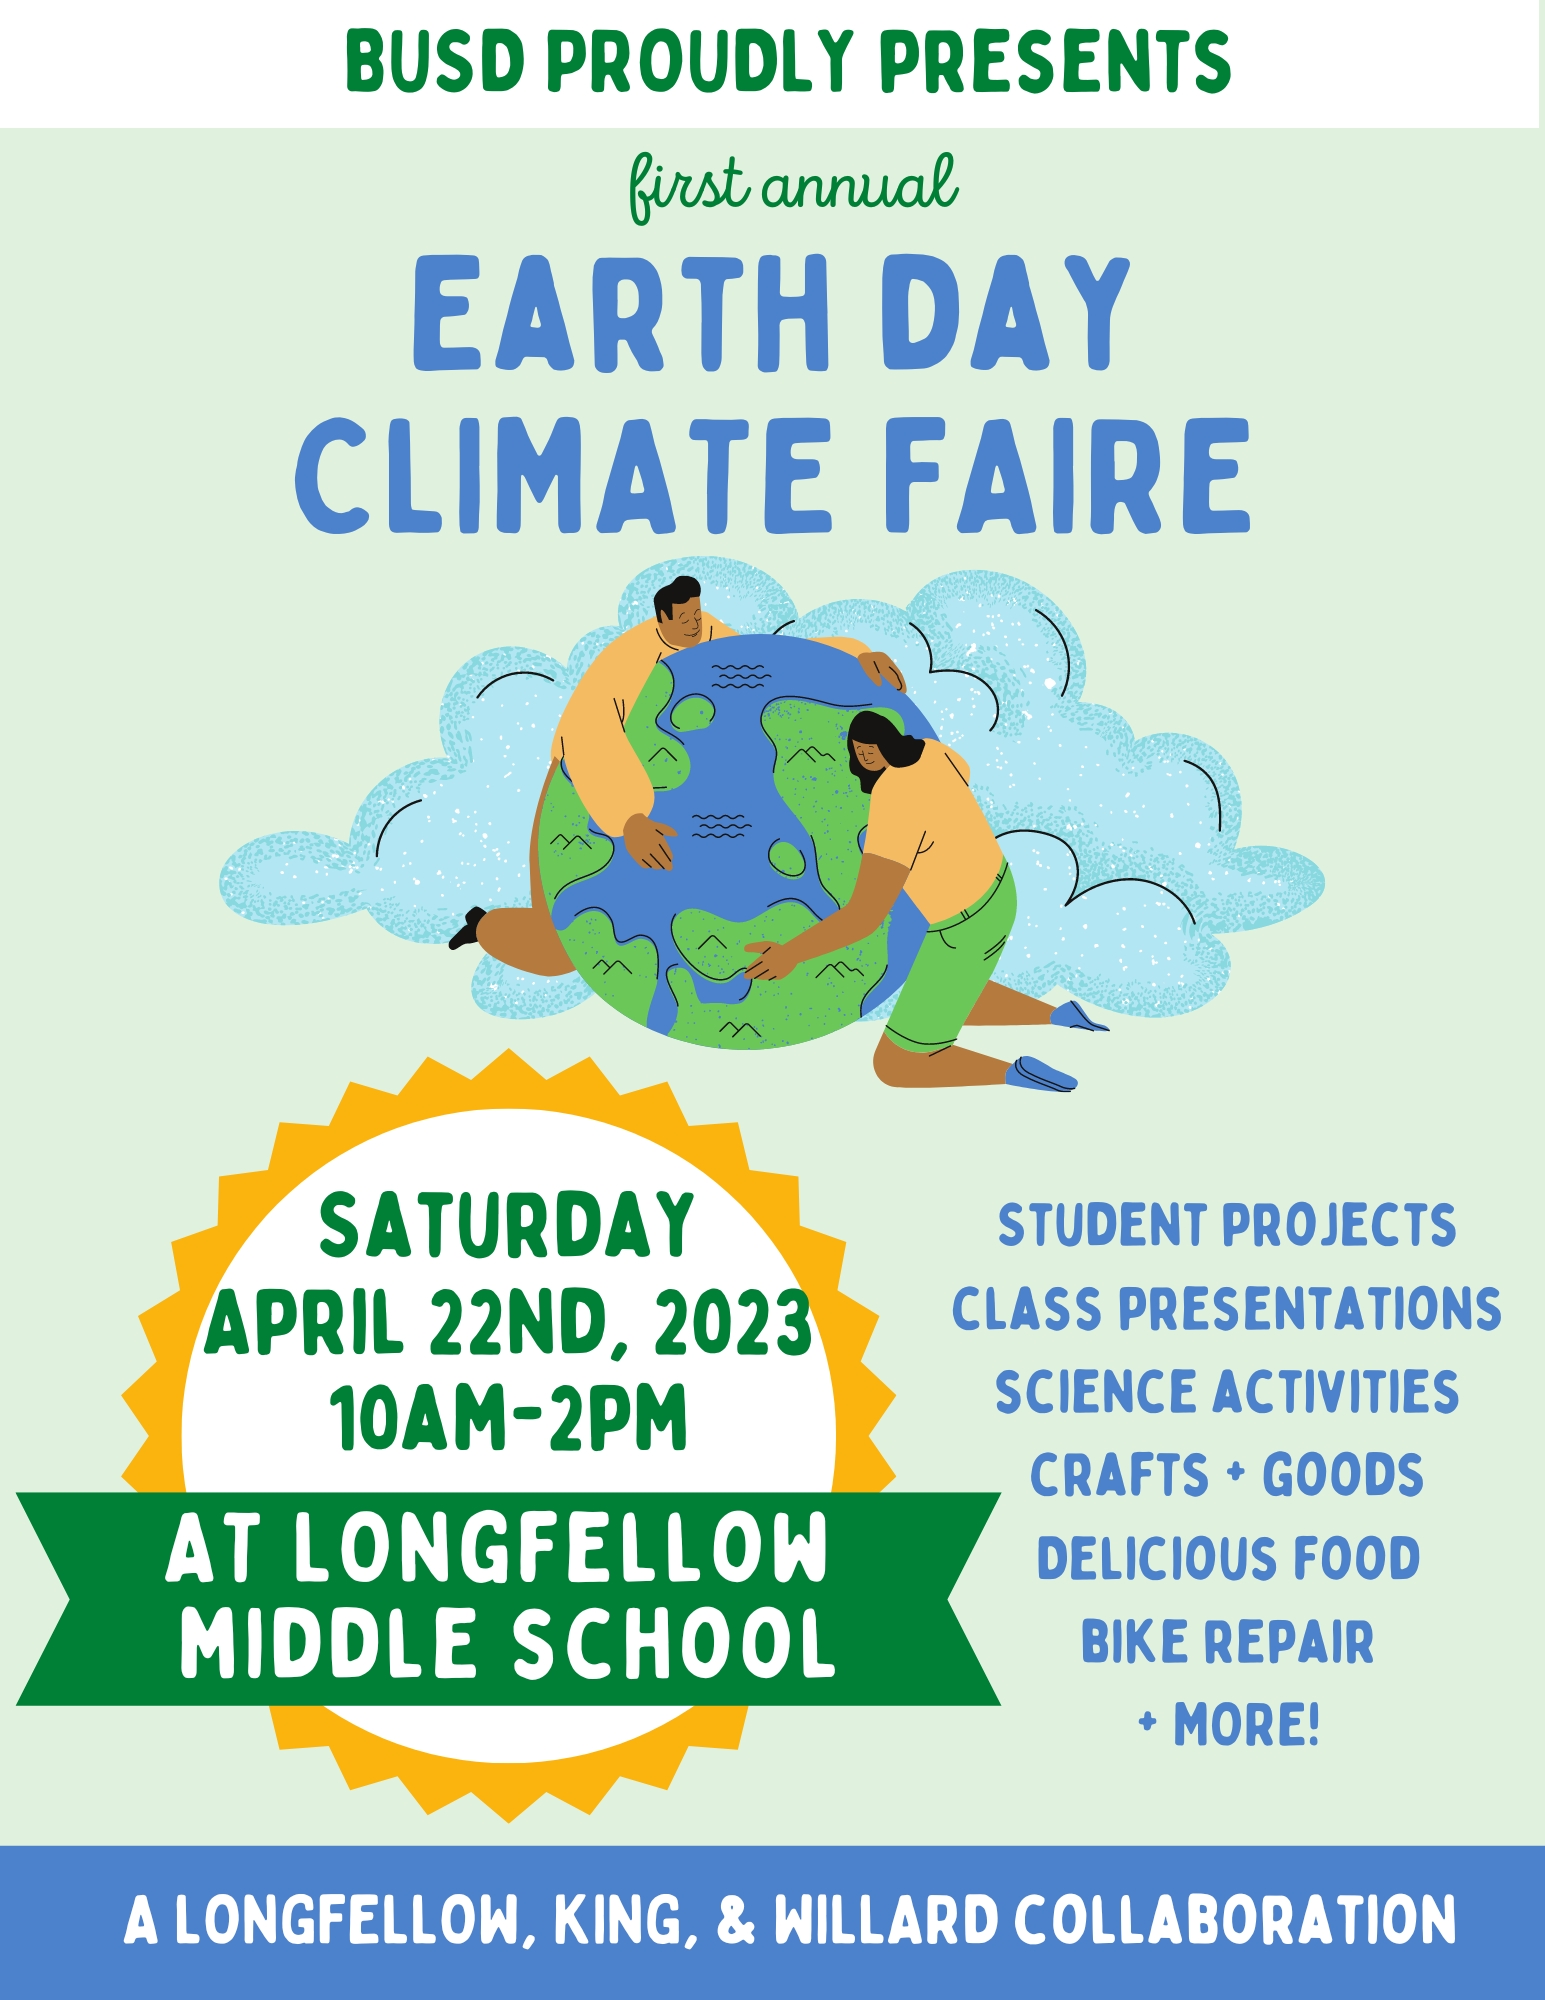 Flyer with the text "Earth Day Climate Faire" with a graphic of two people hugging the earth in front of a cloud.